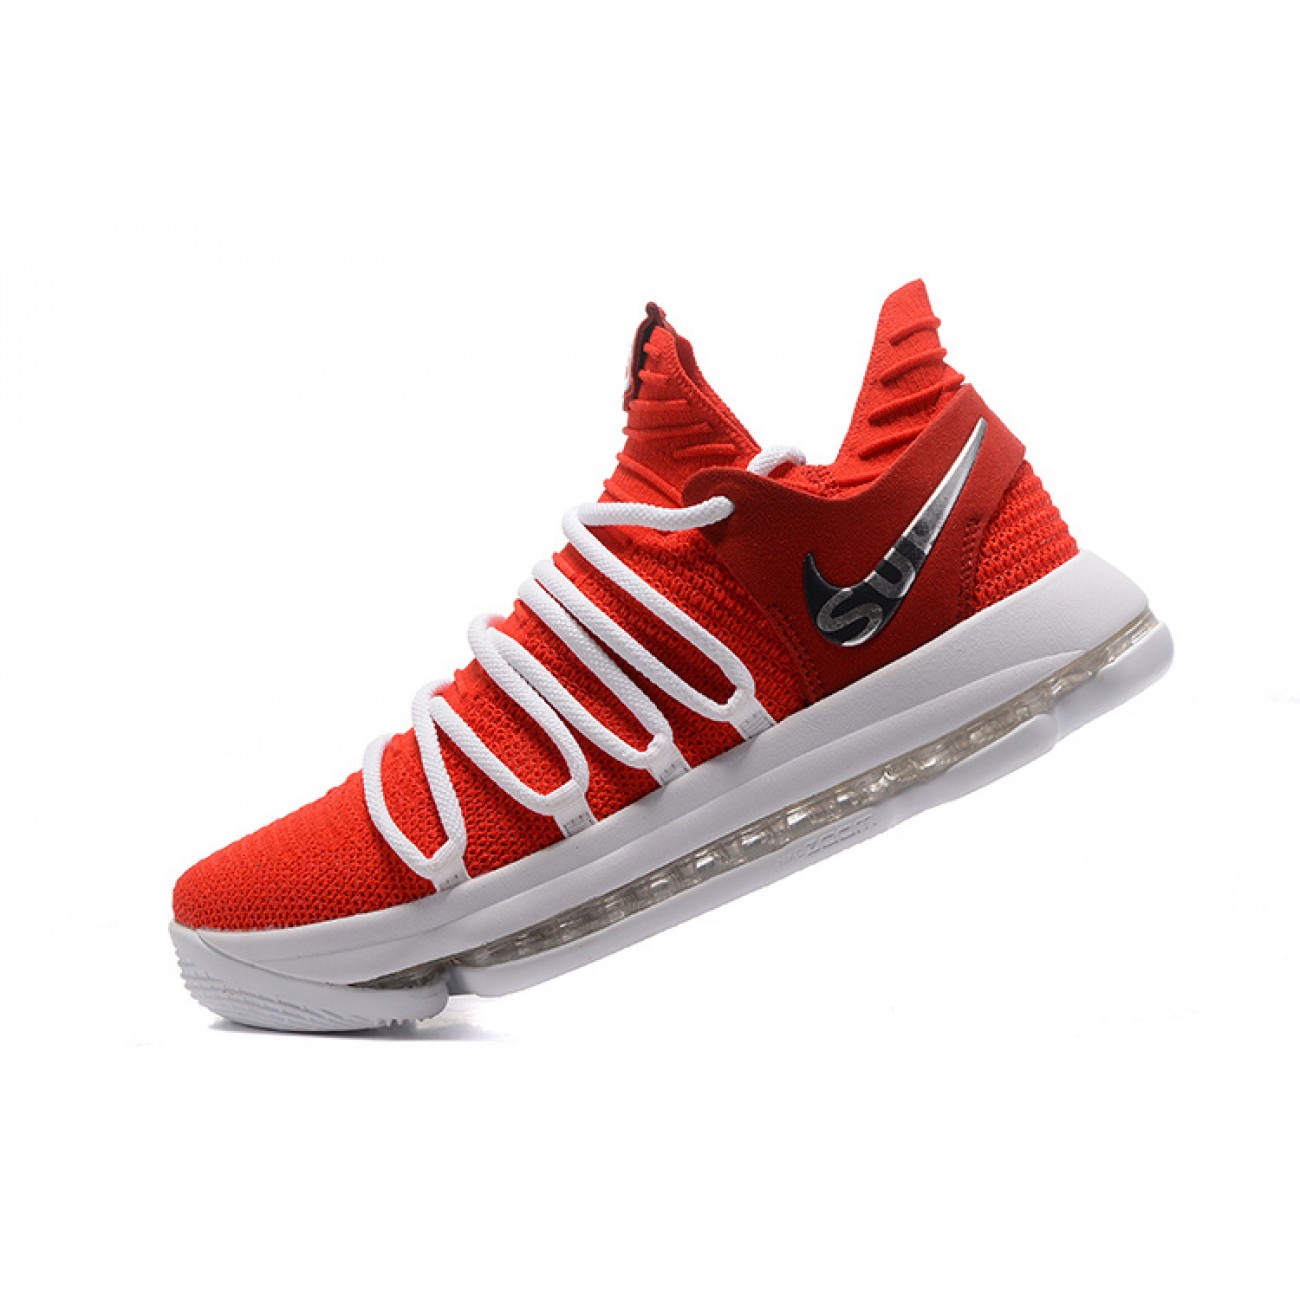 Nike Zoom Kevin Durant KD10 EP "University Red"